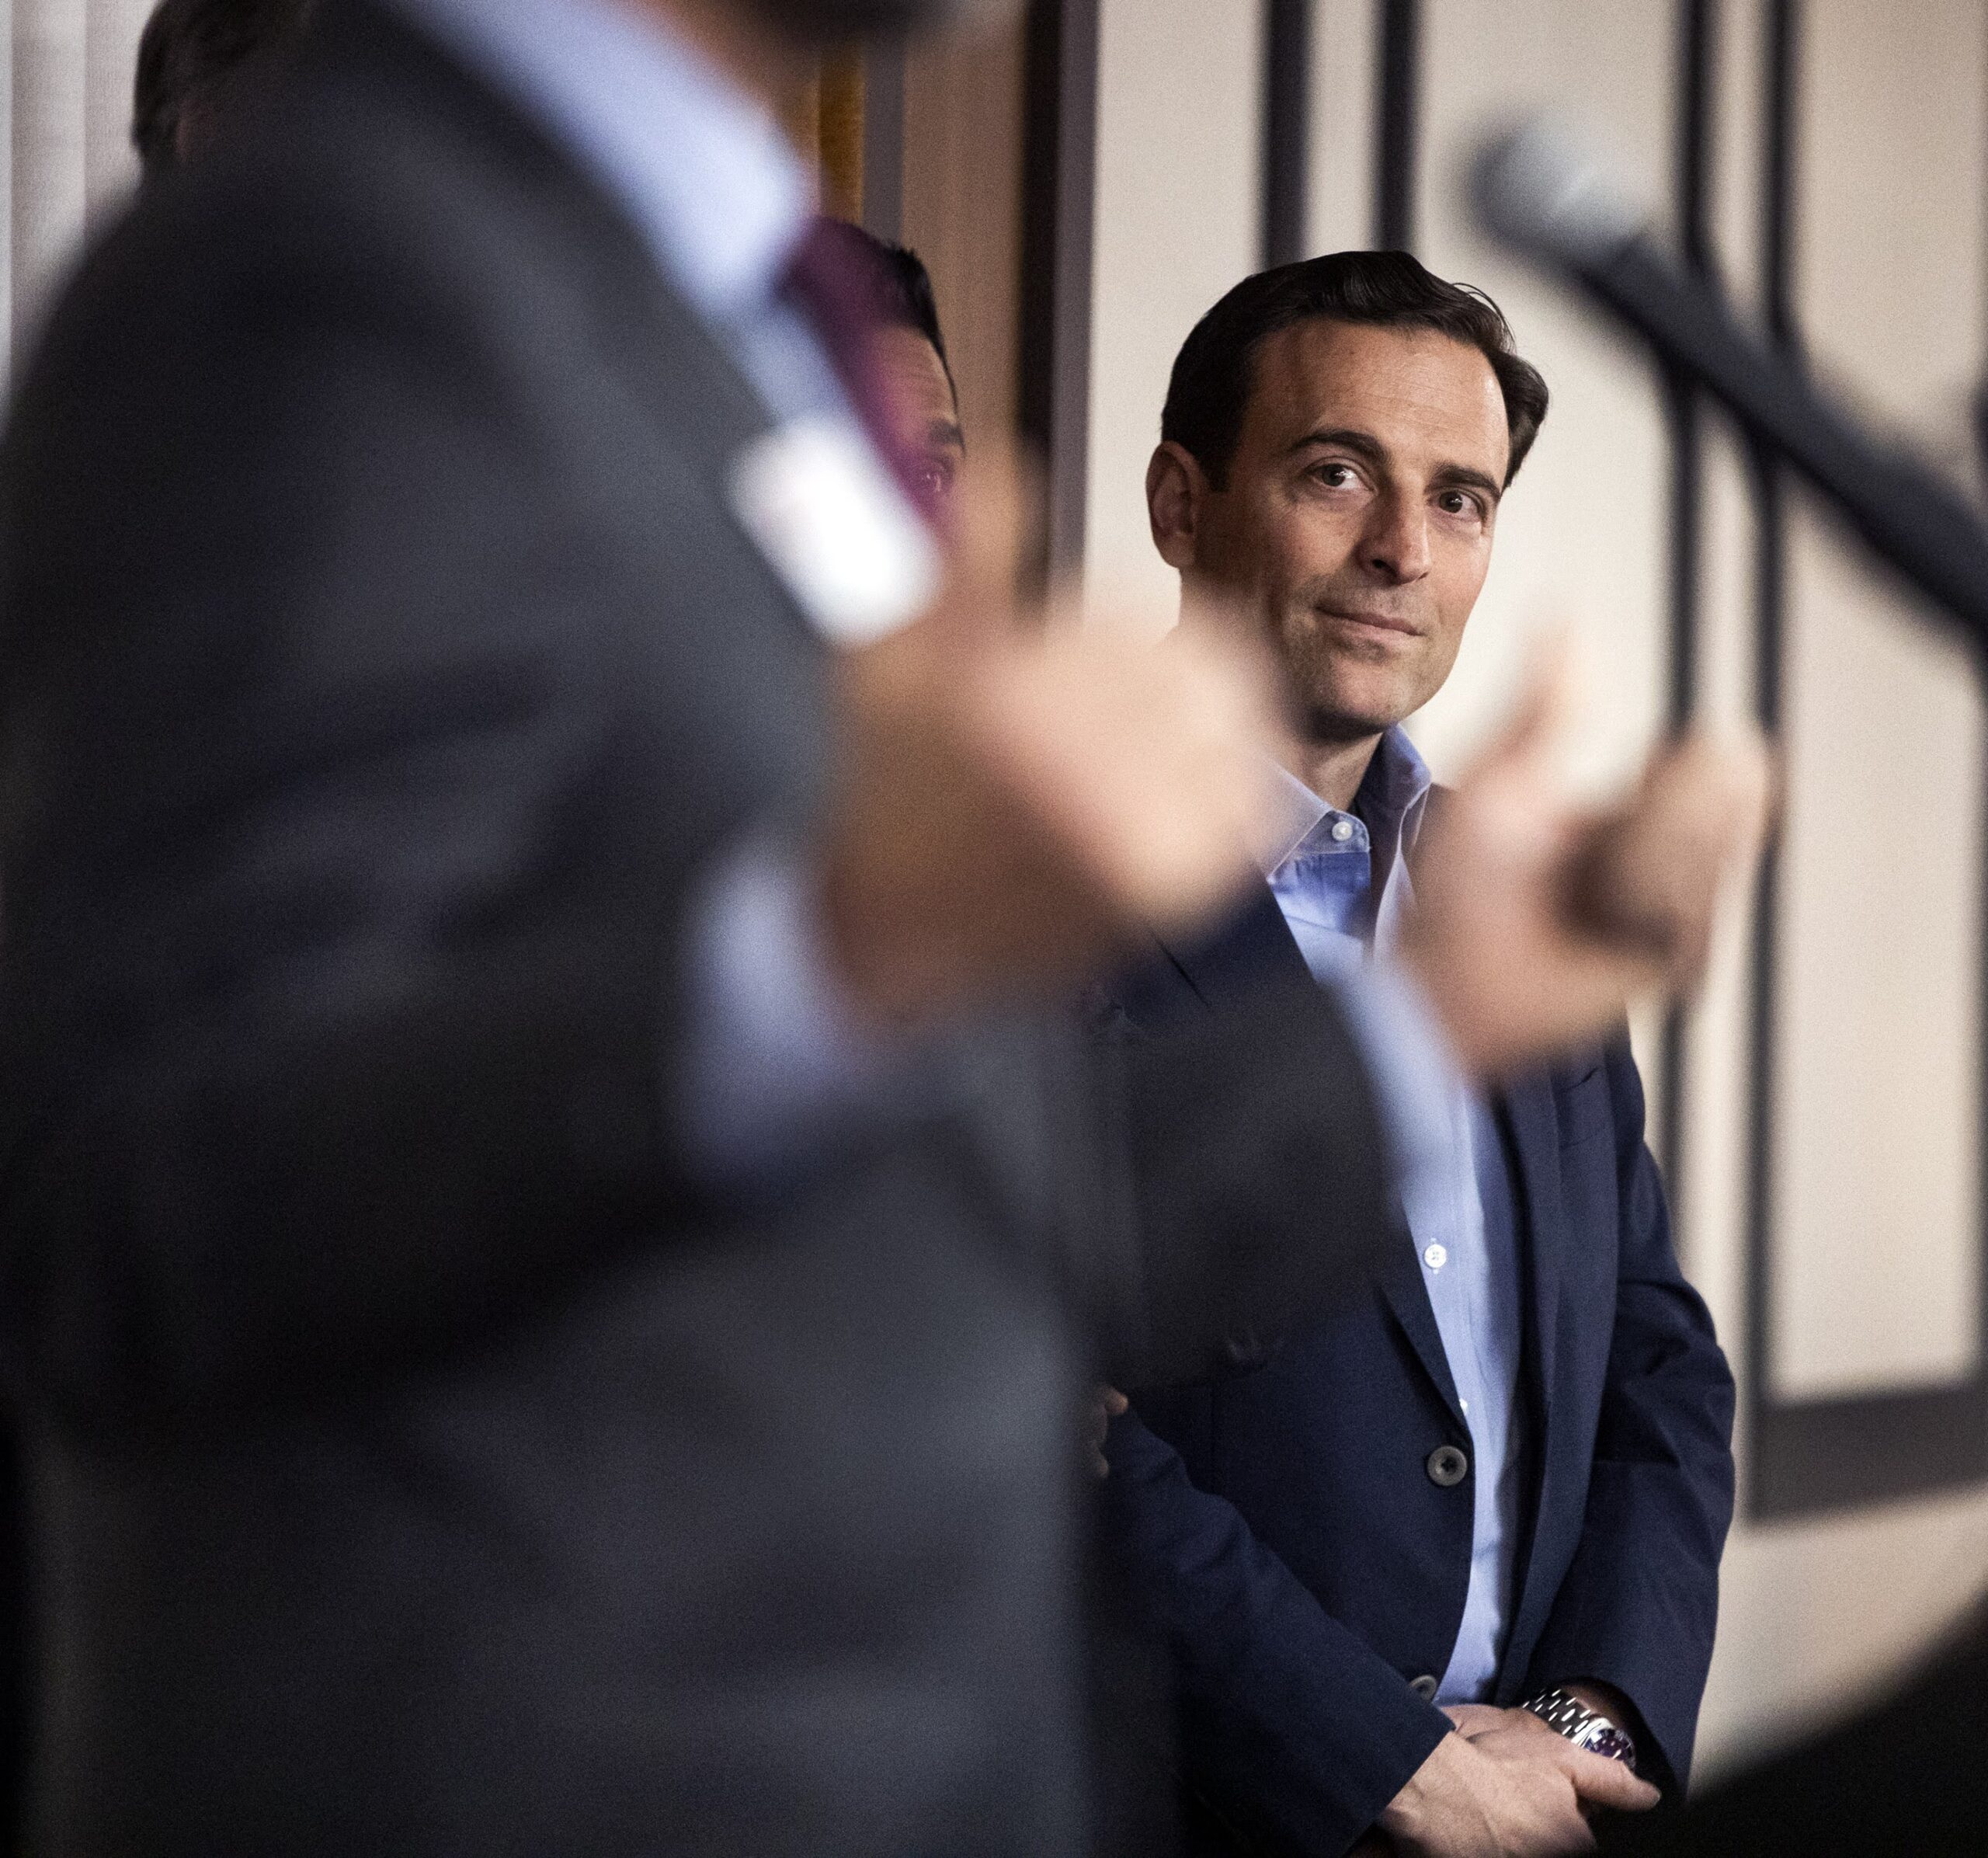 New disclosure shows Laxalt pulled in $1.5 million this year from private law firm – The Nevada Independent